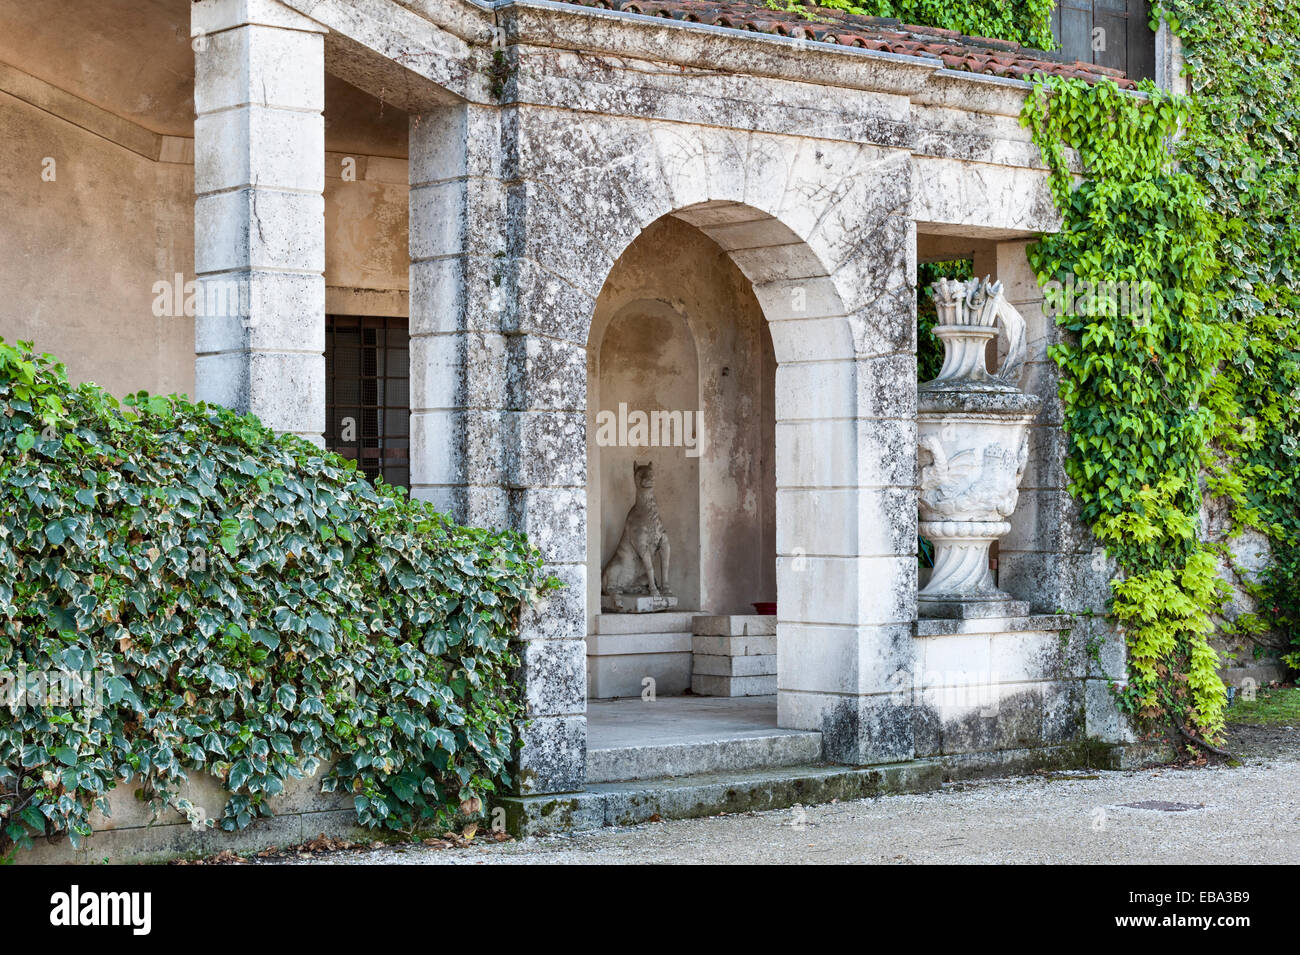 Villa Trissino Marzotto, Vicenza, Italy. The exterior of the original plain 15c building, later decorated with huge stone urns and animal statues Stock Photo